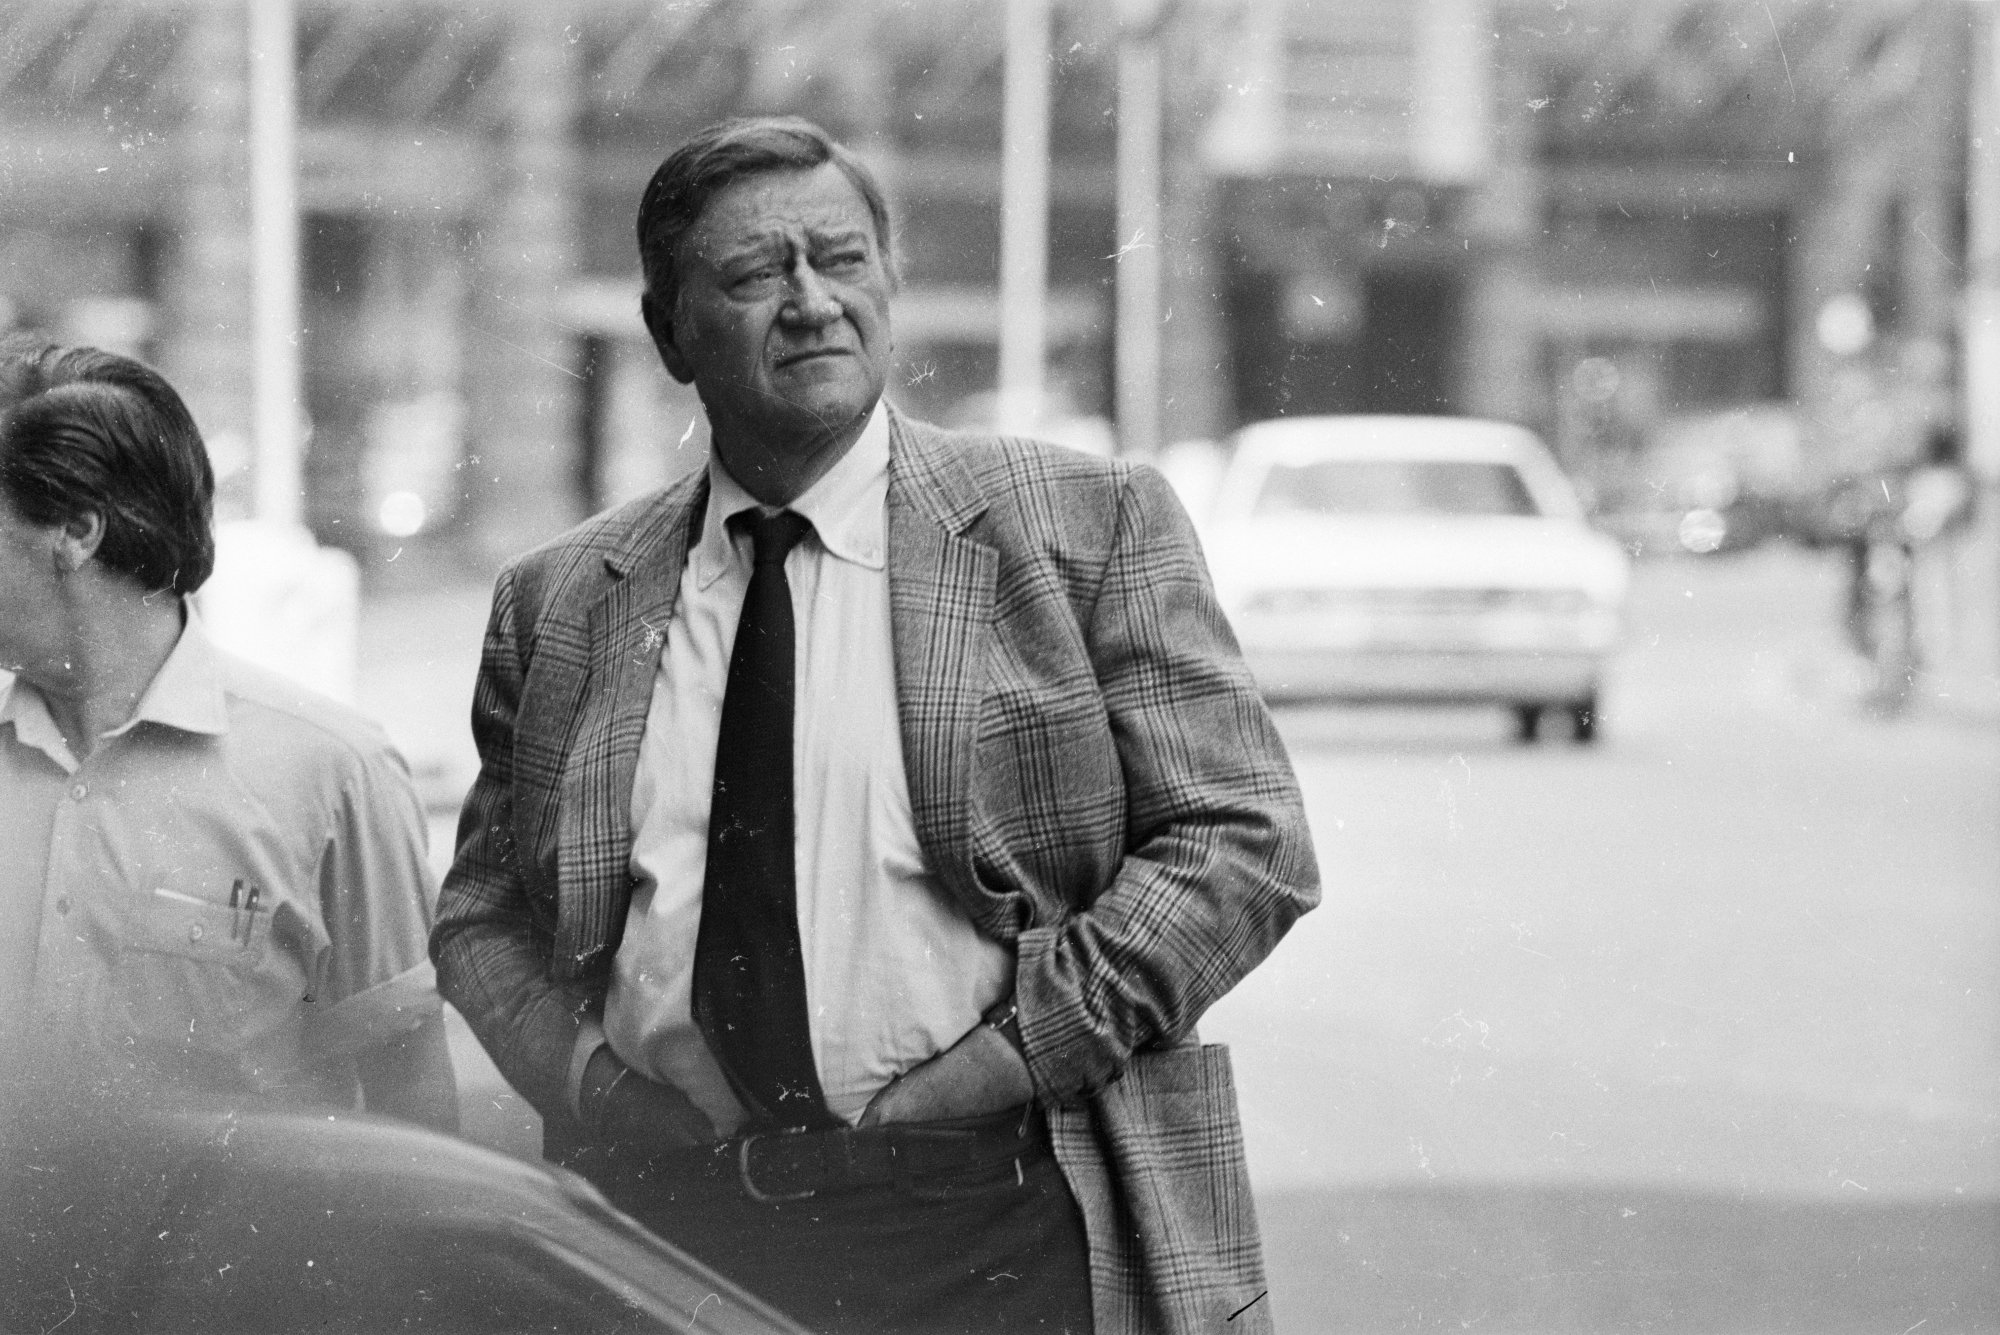 John Wayne standing with his height over six feet wearing a suit and tie with a car driving away in the background